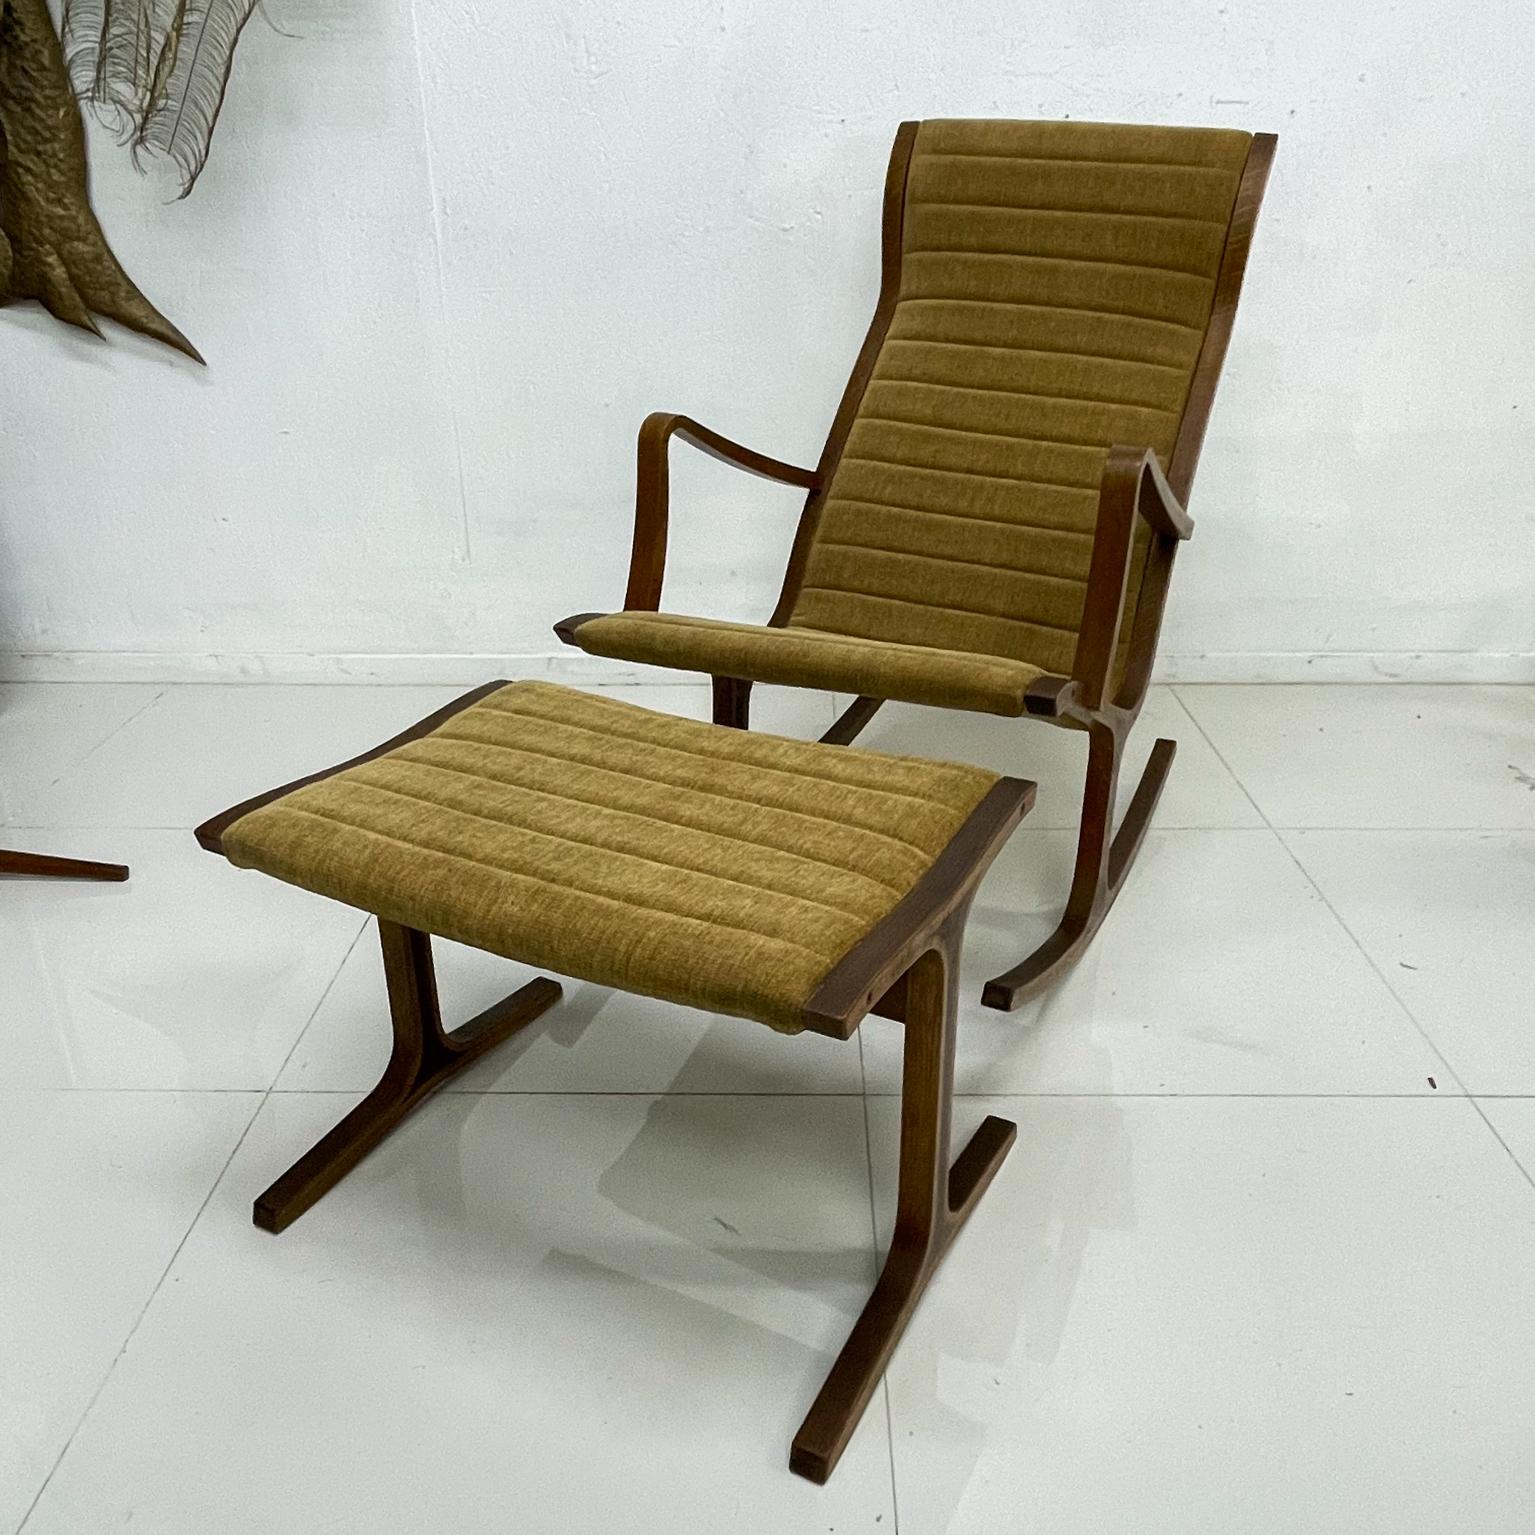 Rocking chair
Tendo Mokko Heron high back rocking chair and footrest from Japan 1960s
Designed in bentwood with original upholstery
Heron chair designed by Mitsumasa Sugasawa for Tendo Mokko
Rocker 36 H x 22.38 W x 33.25 D seat 16 arm 23.5